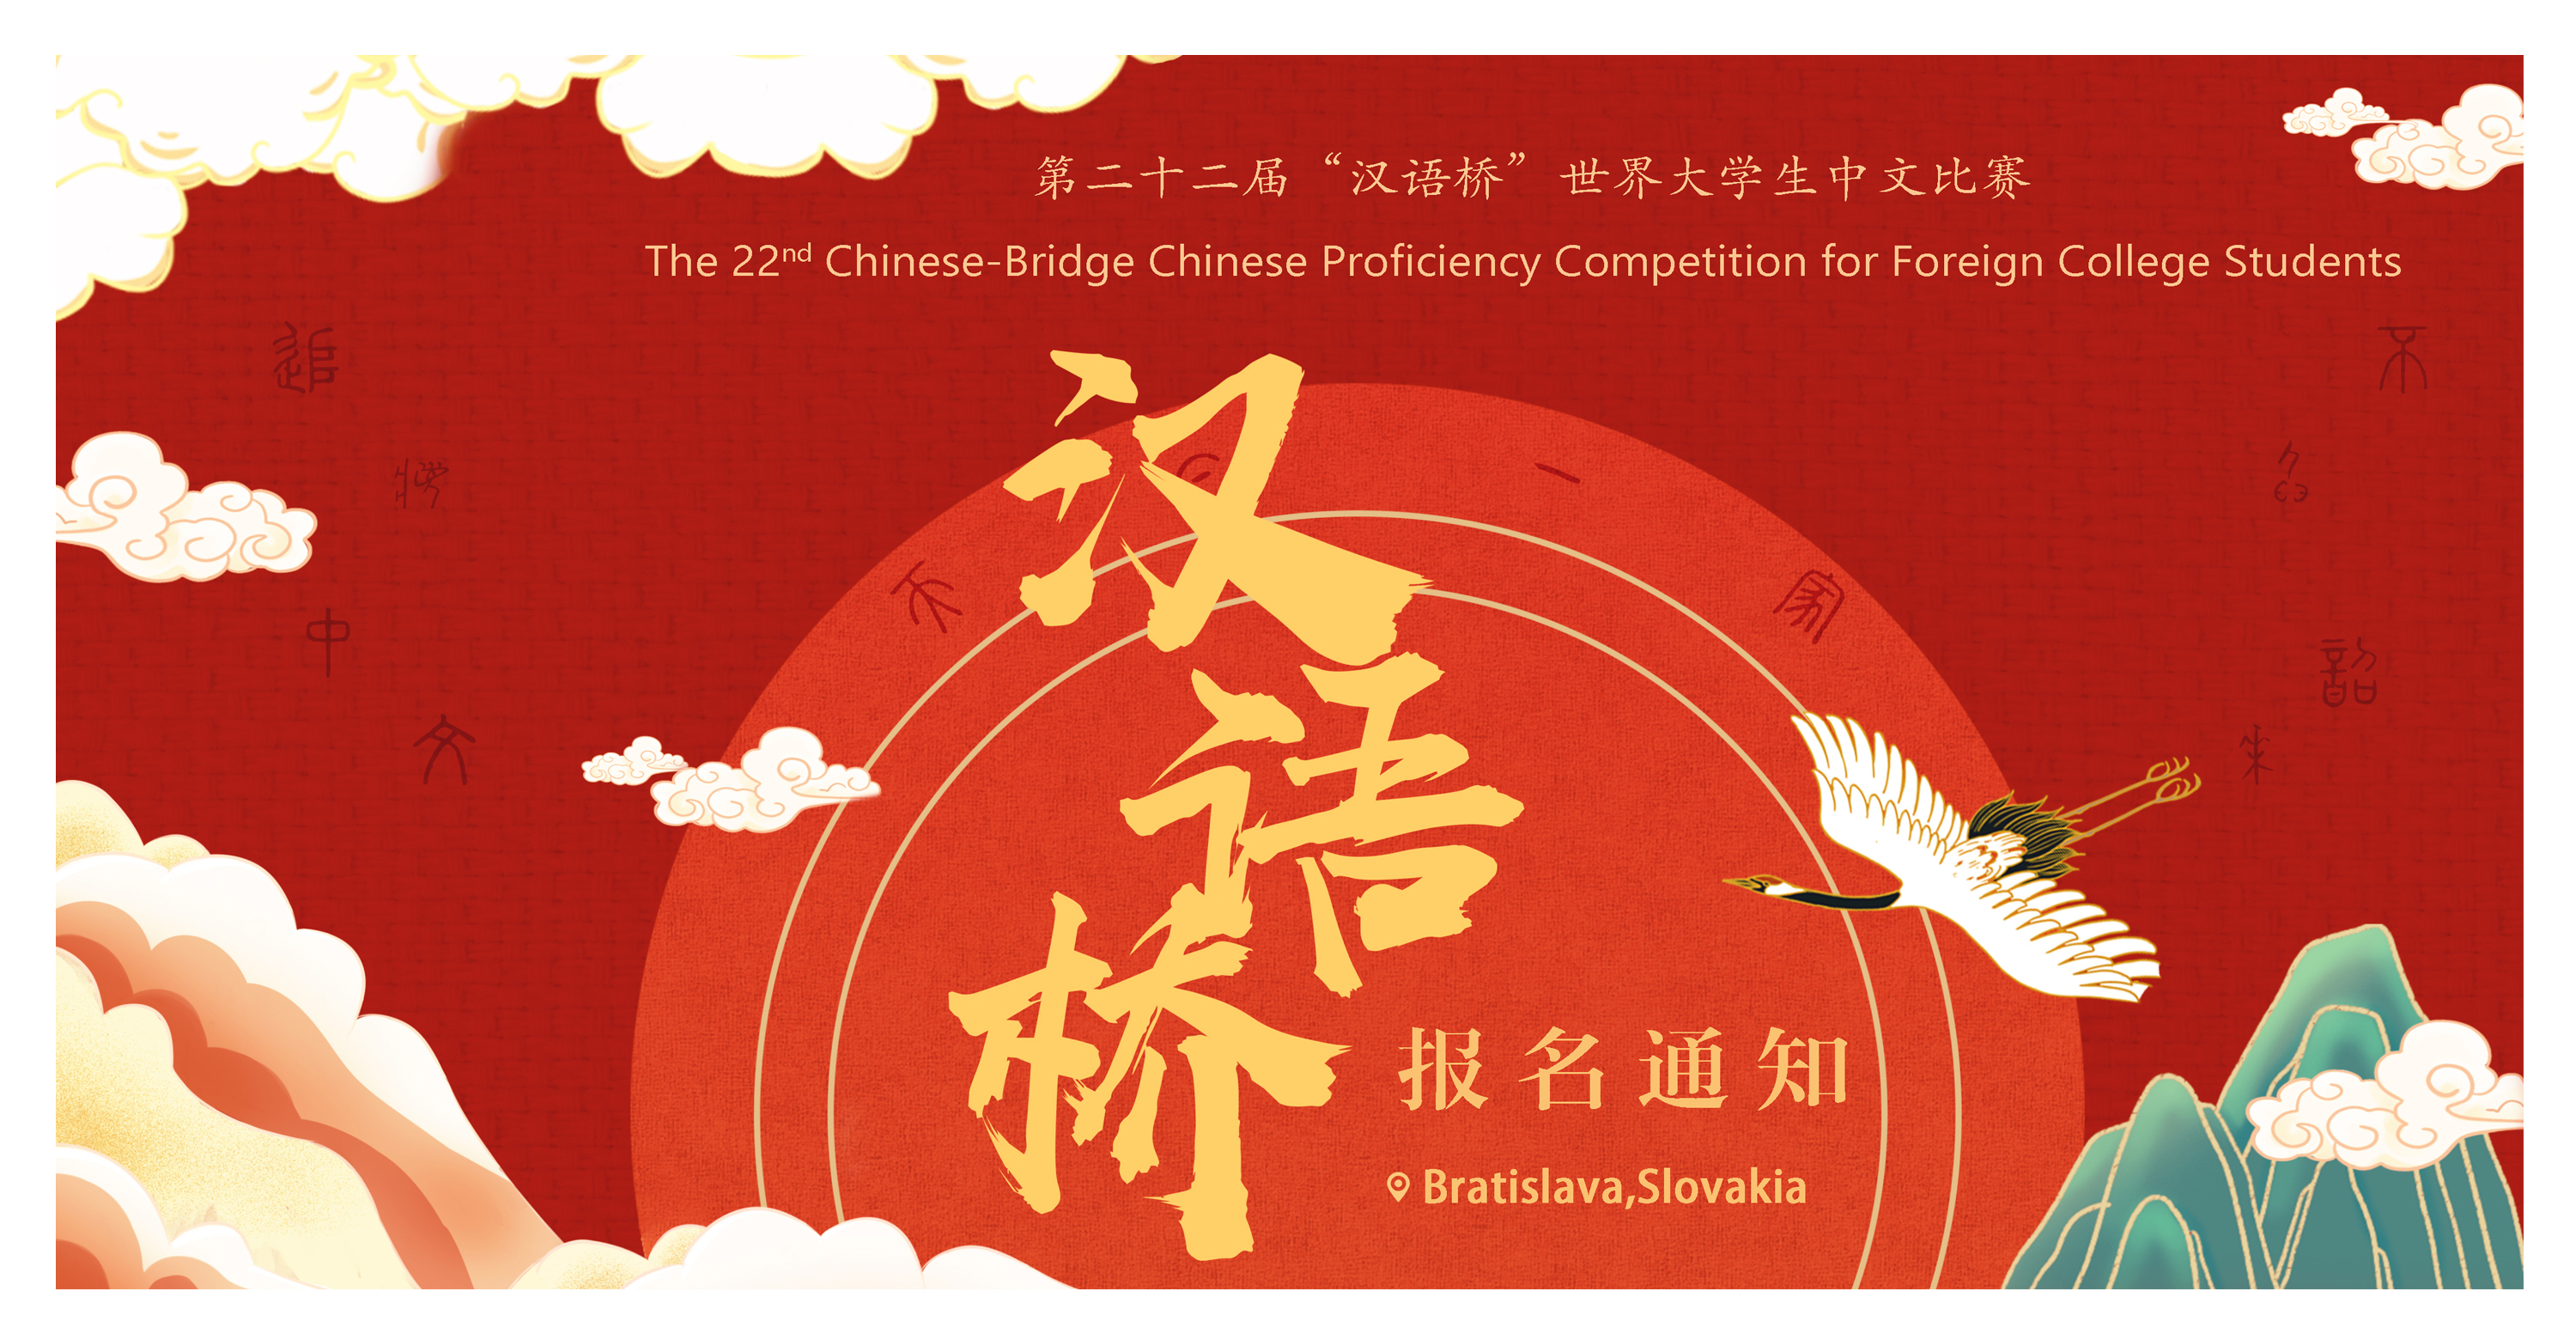 The 22nd “Chinese Bridge” Chinese Proficiency Competition for Foreign College Students